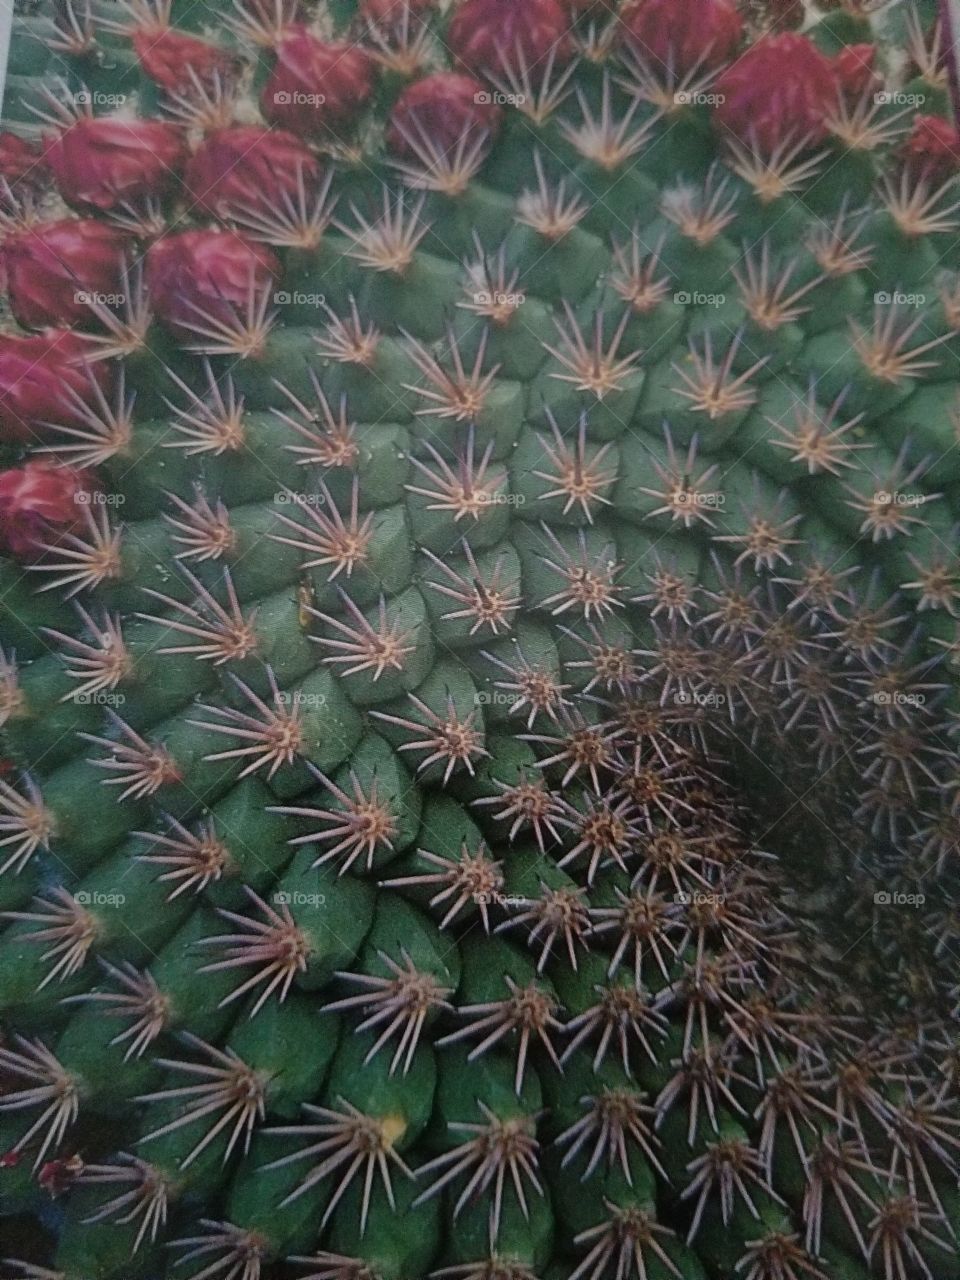 I loved the spiraling effect of this cactus. To make the eye travel around the spiral, I composed tightly, including the buds for a little color break. The repetitive movement inward creates the rhythm.